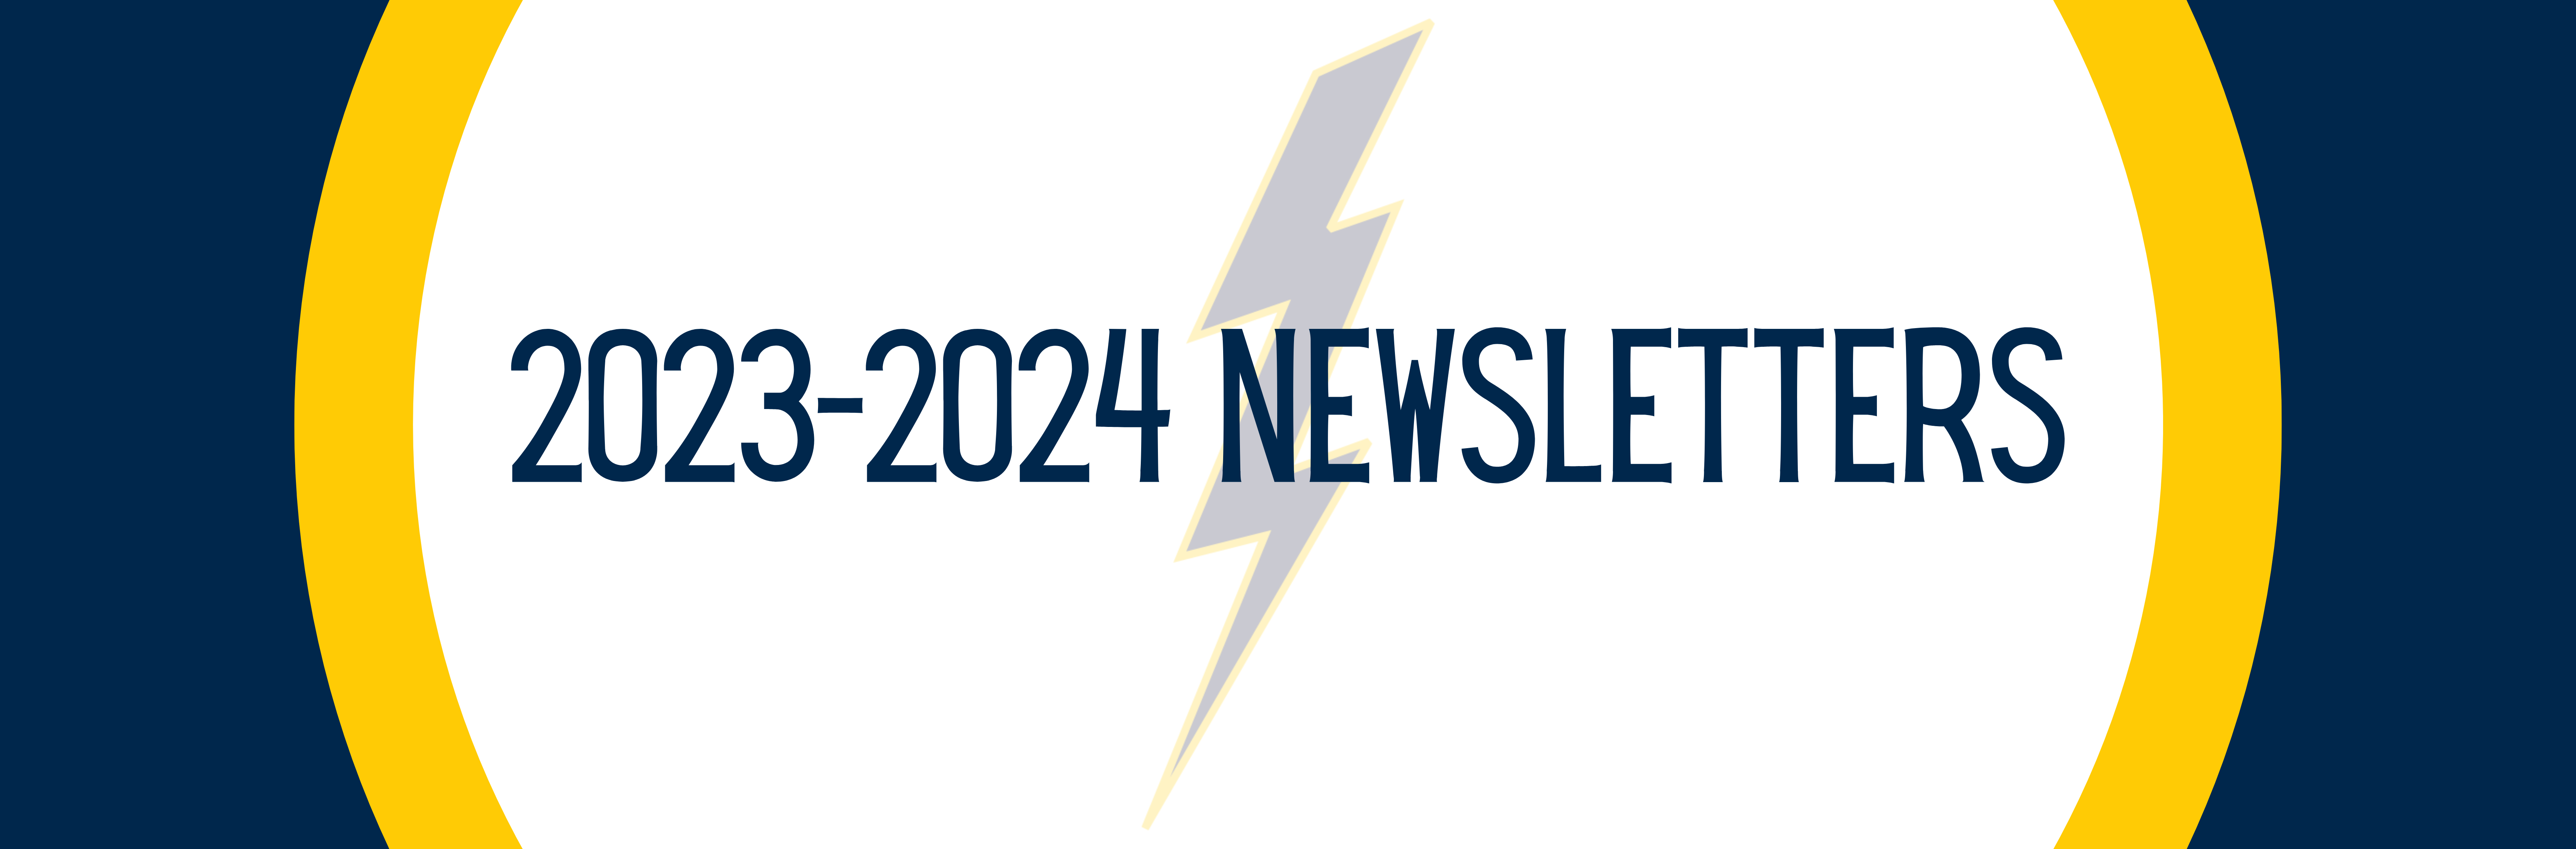 2023 Newsletters